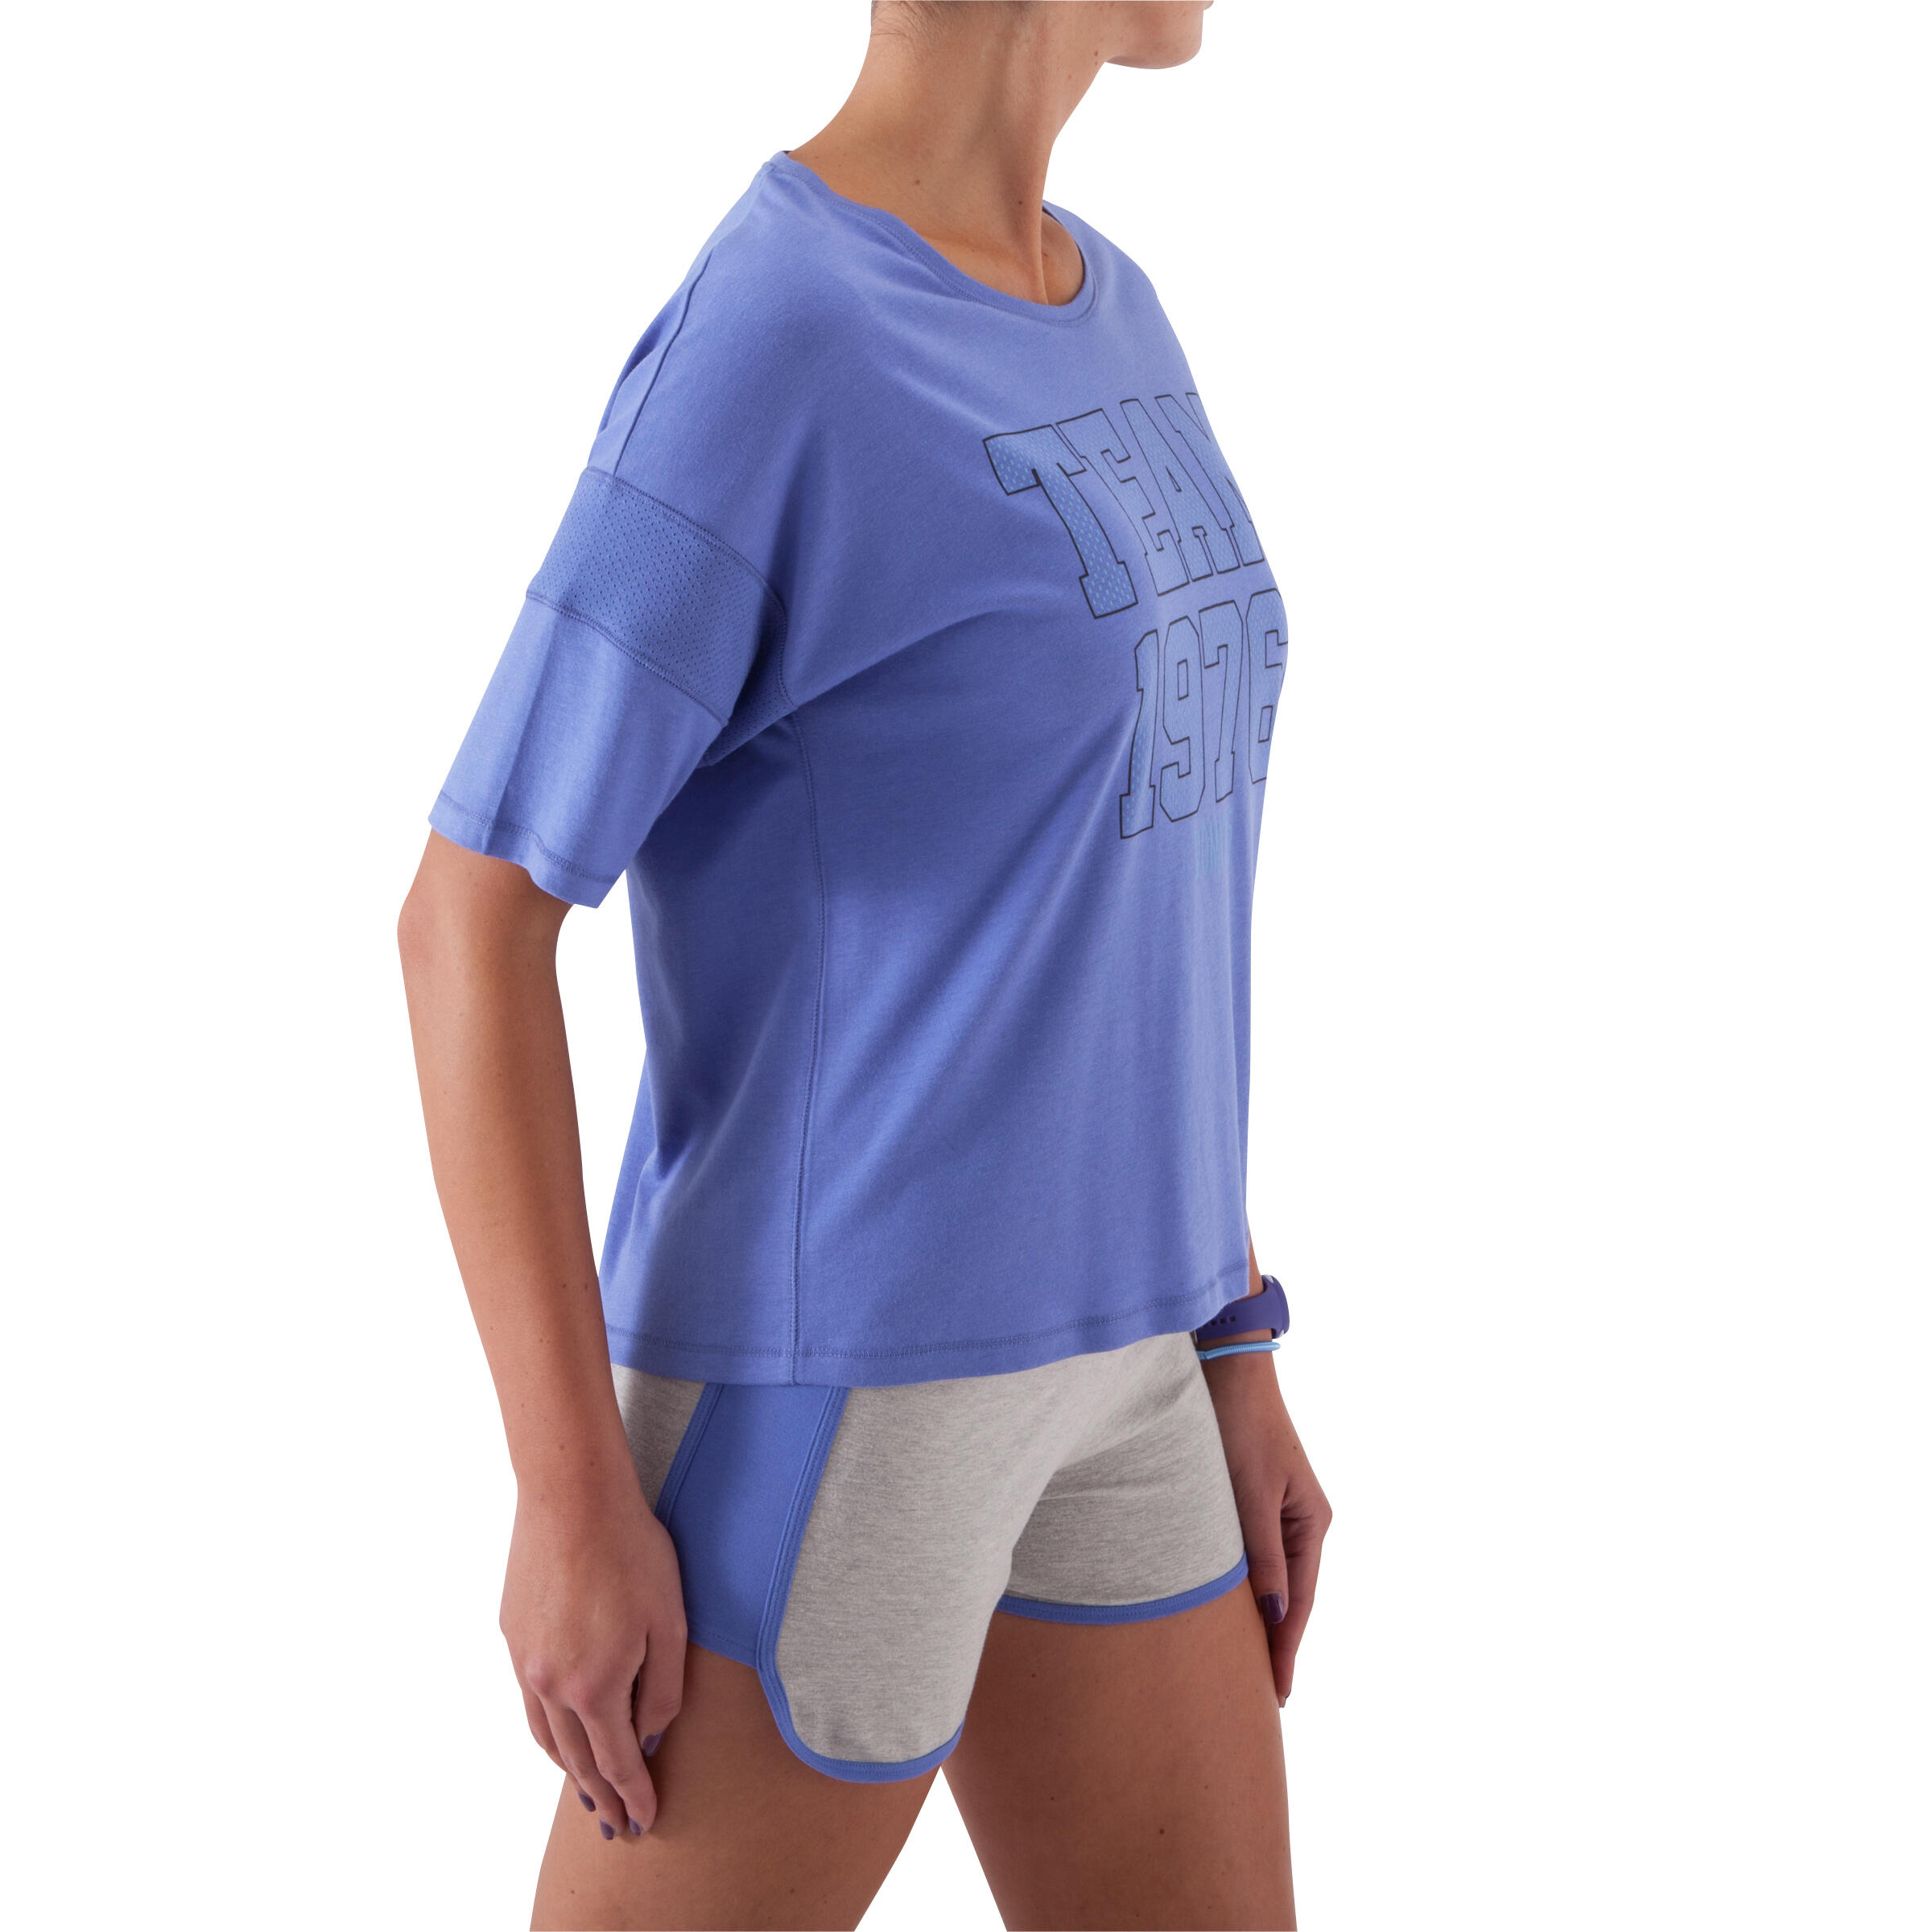 Women's Relaxed-fit Fitness Short-Sleeved T-shirt - Blue 4/13